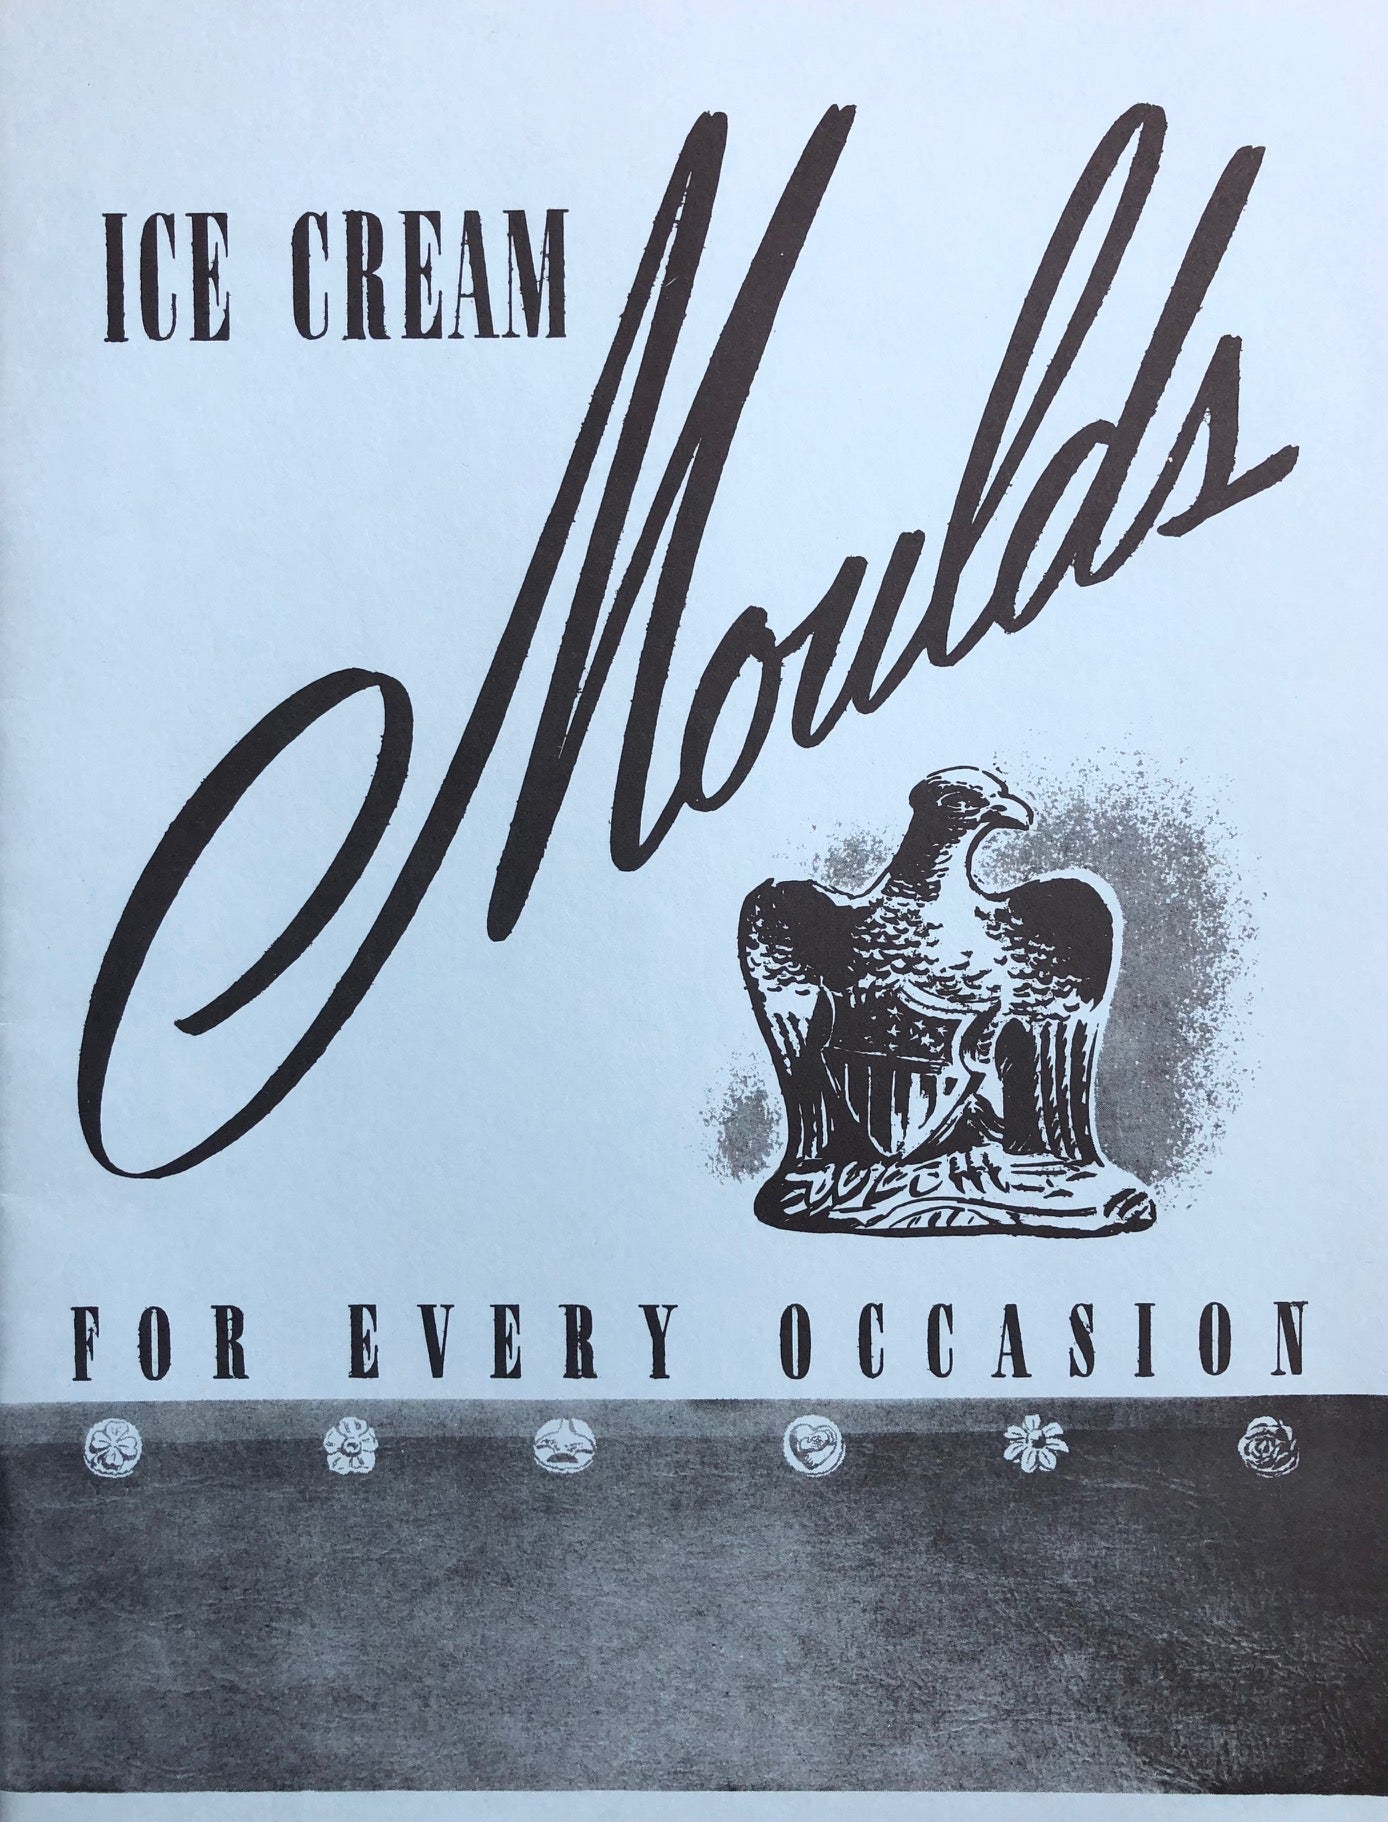 (Ice Cream) Fr. Krauss' Son. Ice Cream Moulds for Every Occasion.